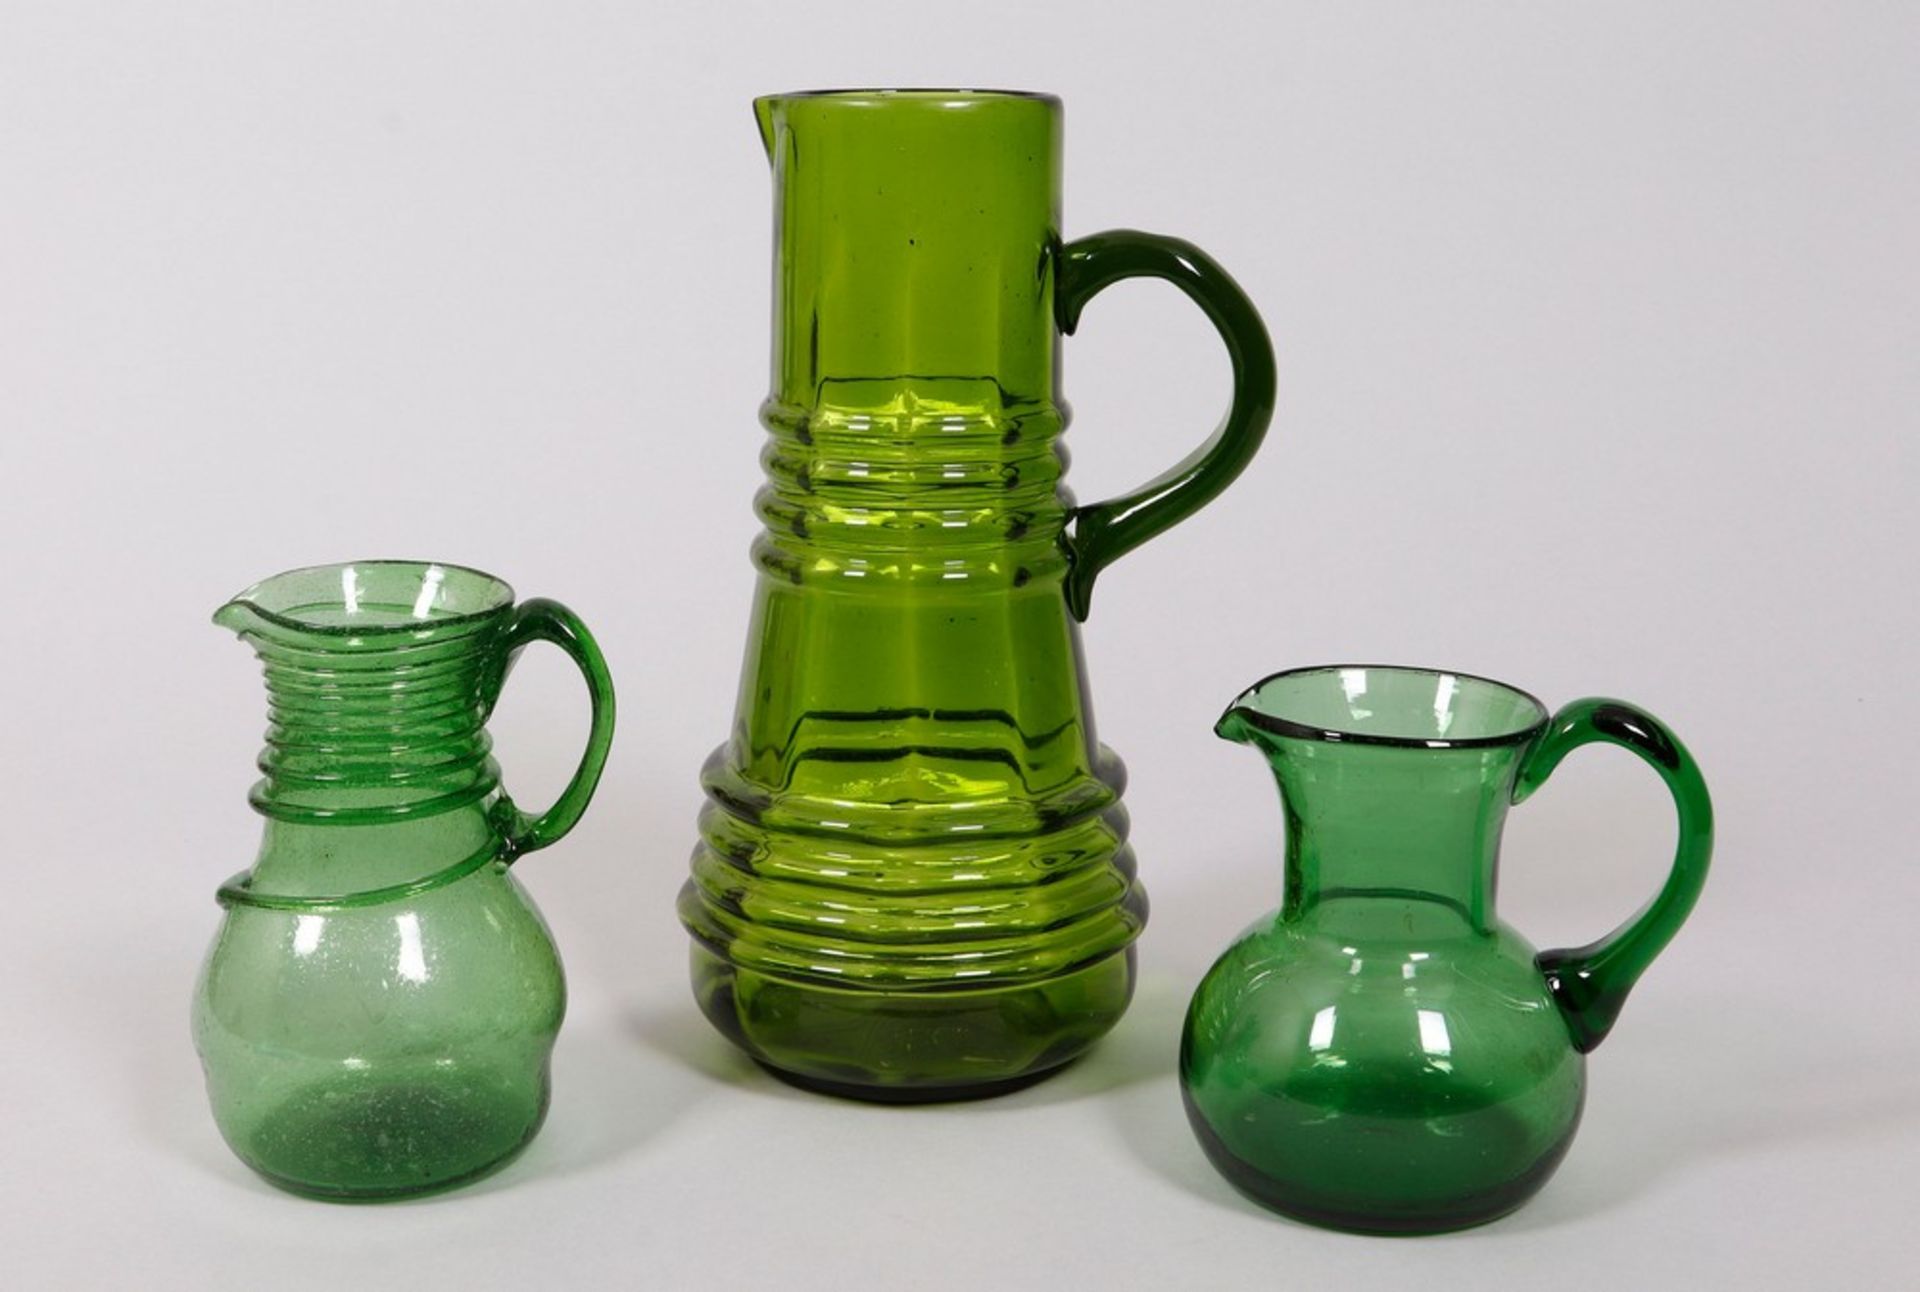 Mixed lot of glass jugs in green, 3 pieces, German/Bohemian, 19th/20th C.